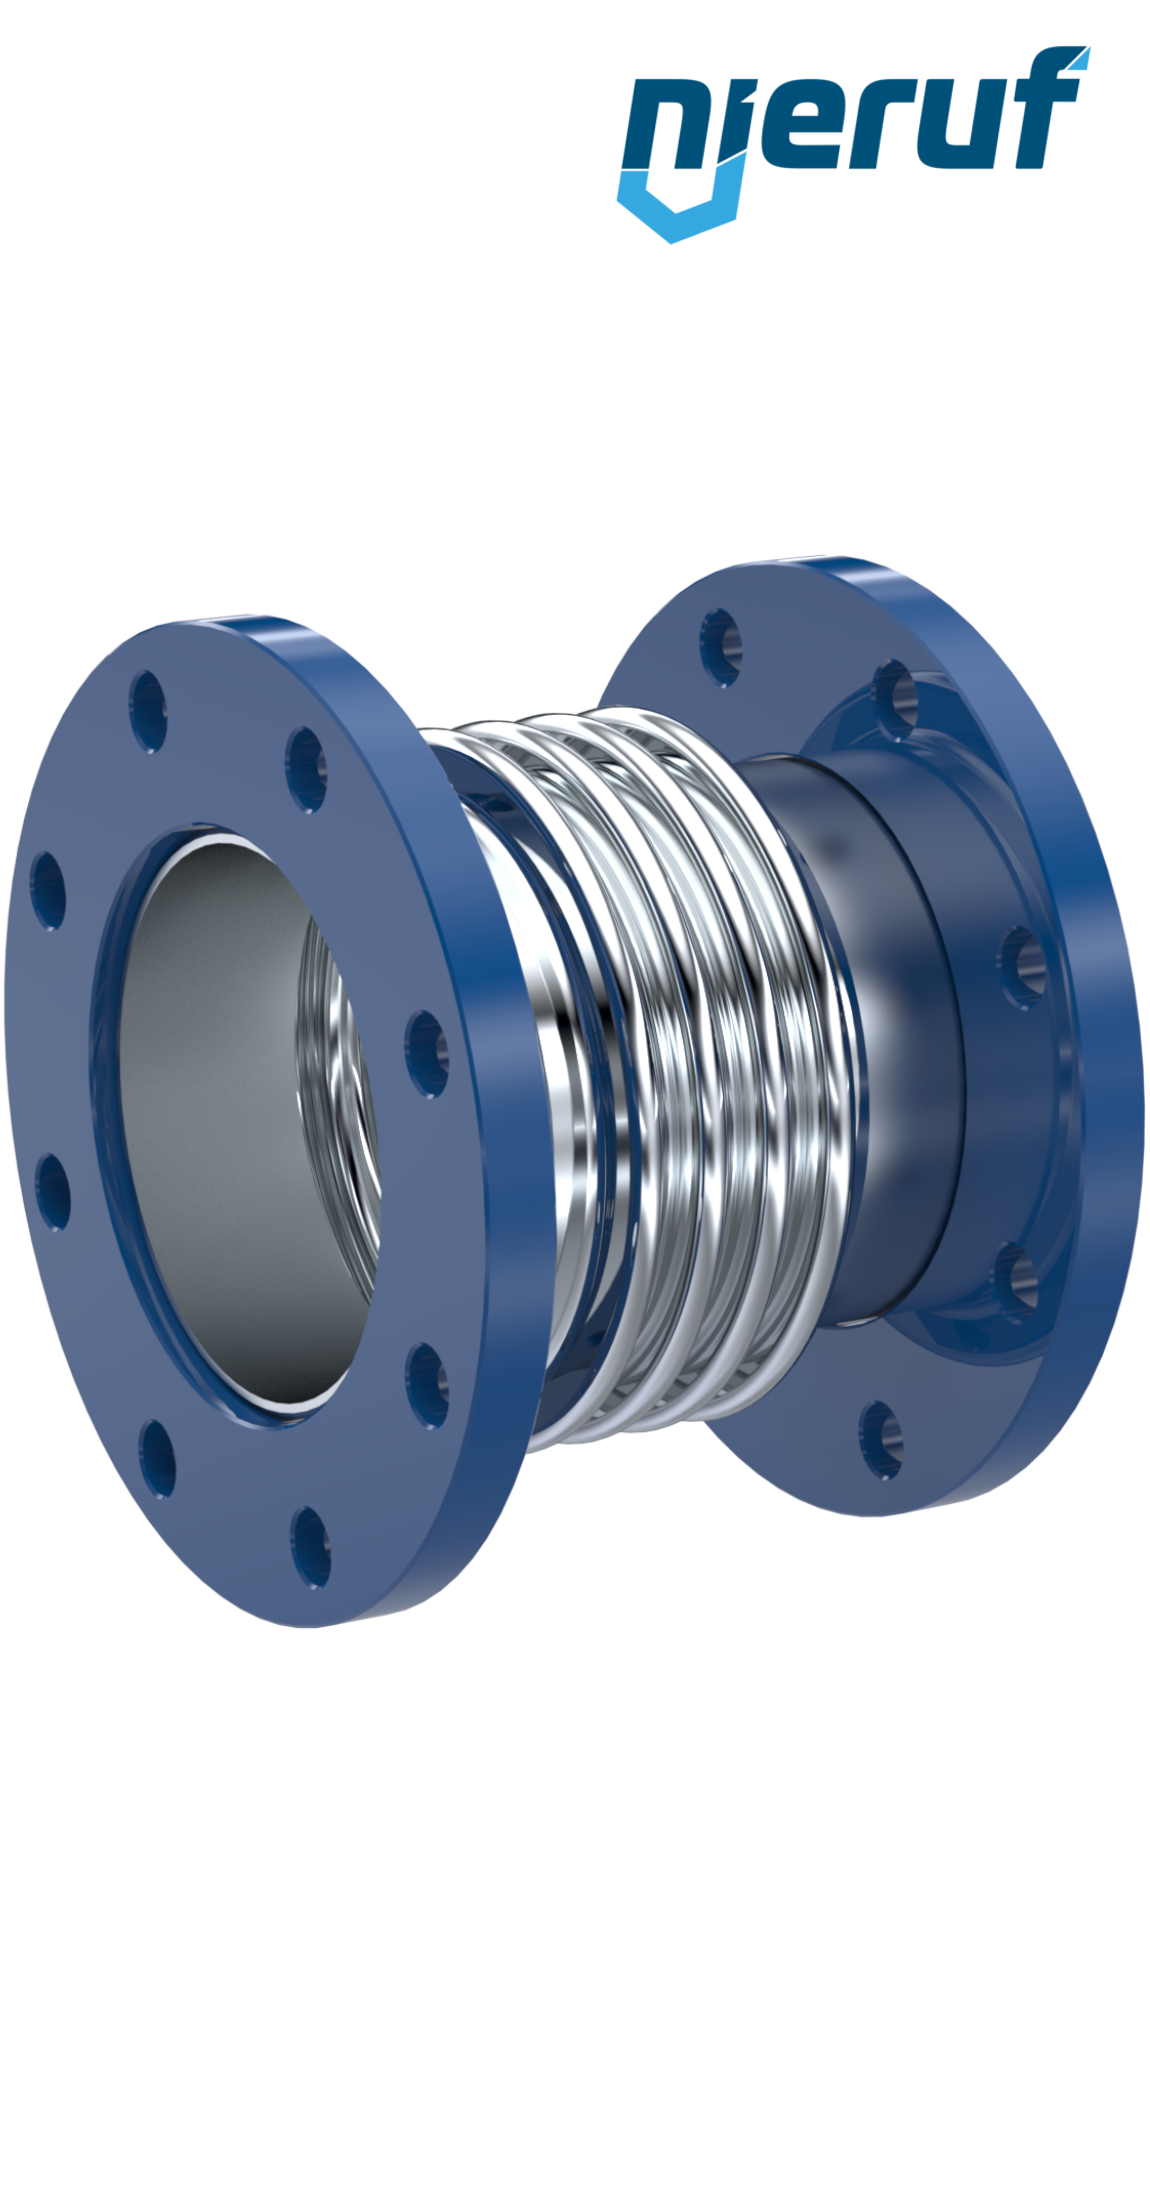 Axial expansion joint DN150 type KP05 fixed flanges and stainless steel-bellows